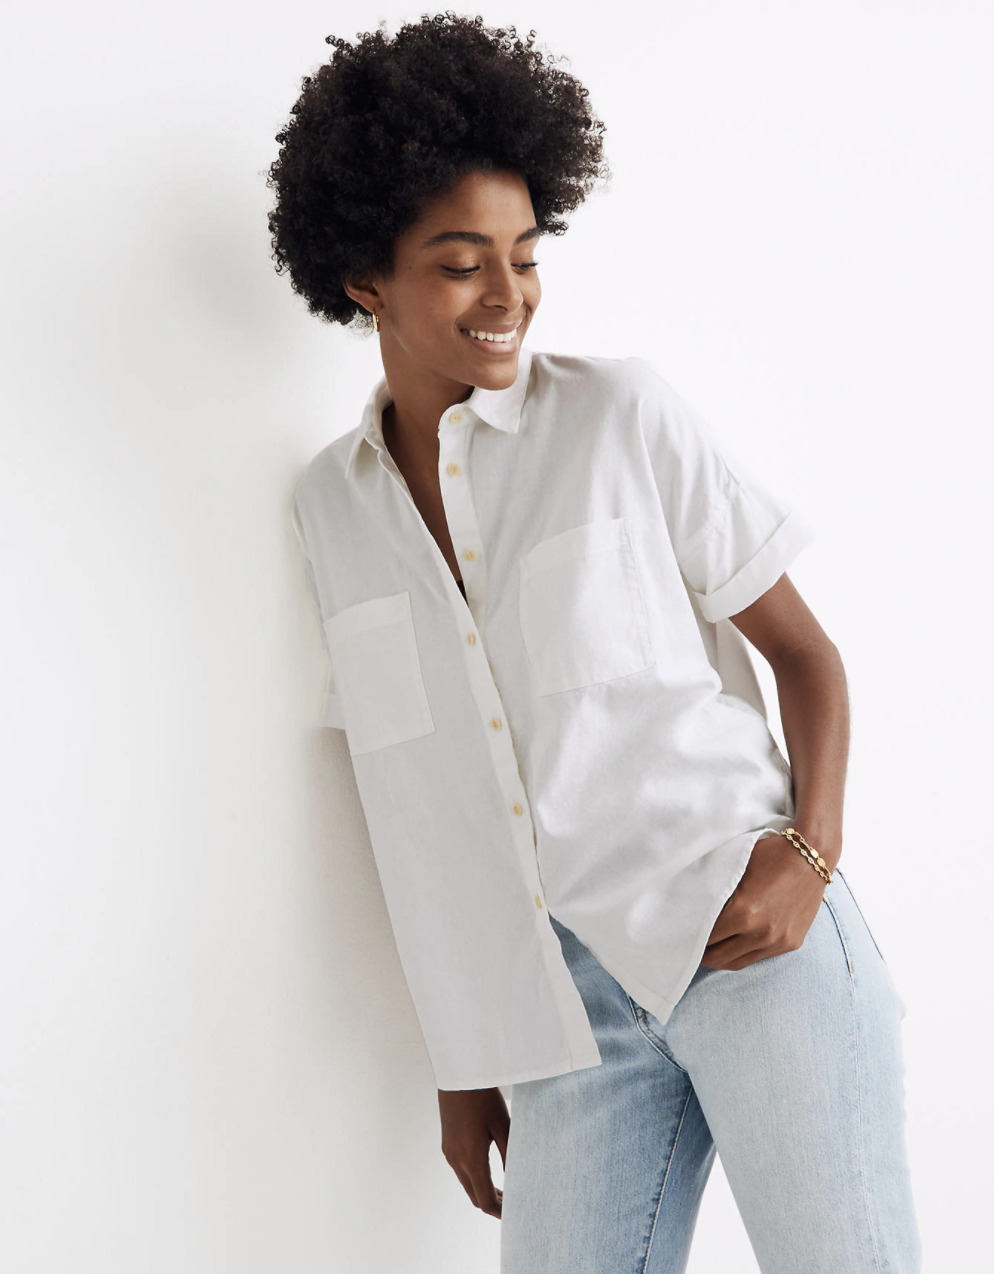 5 Outfit Items to Pair With a White T-Shirt | Who What Wear